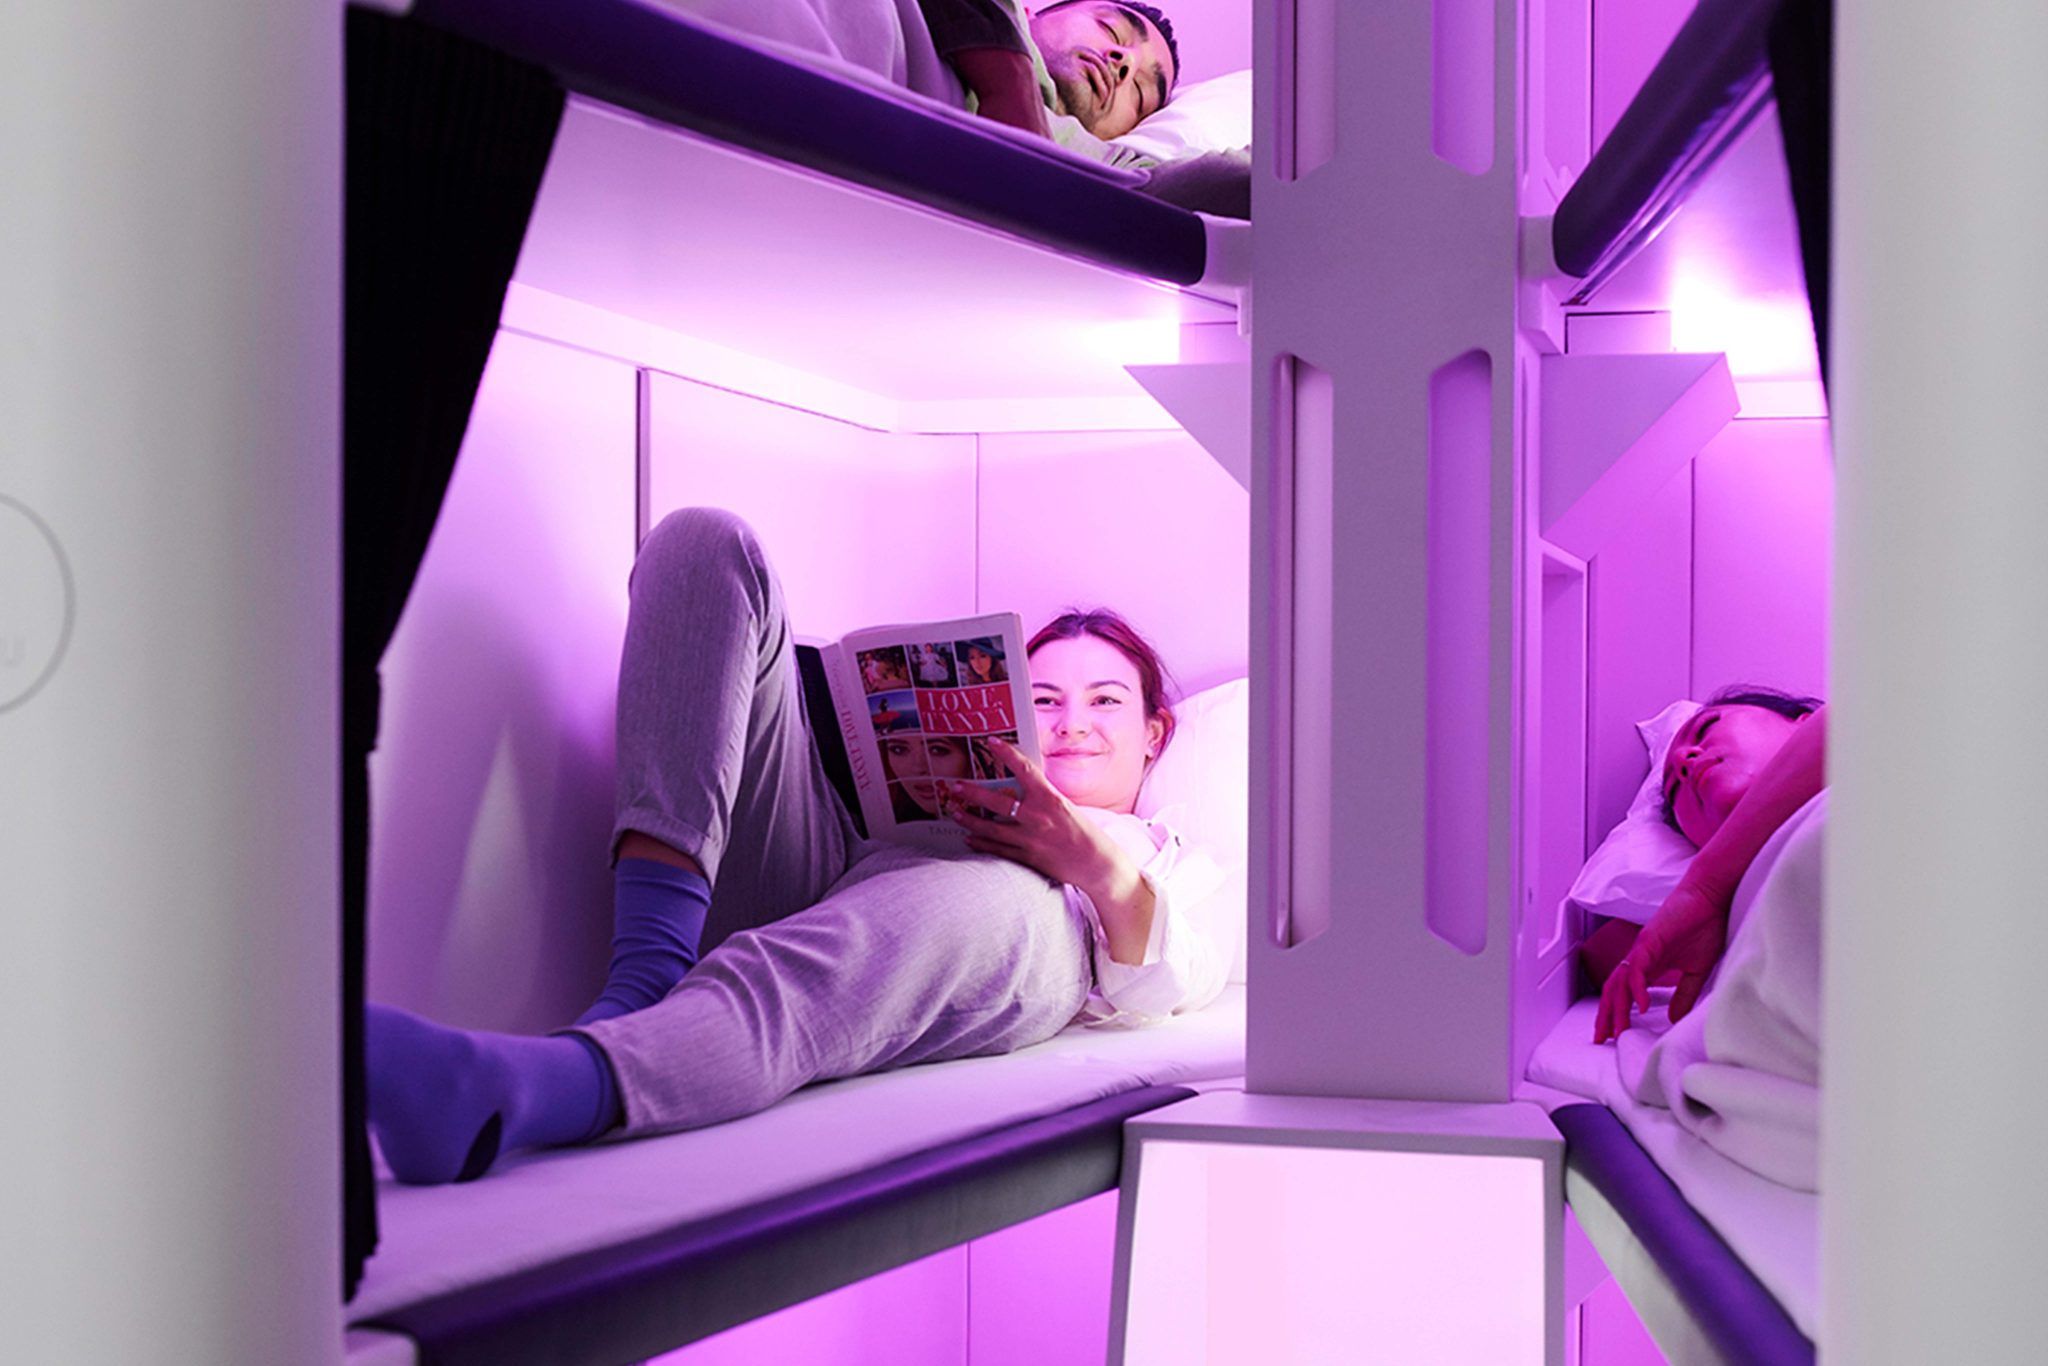 Buckle up: The world's first economy airplane bunk beds are coming